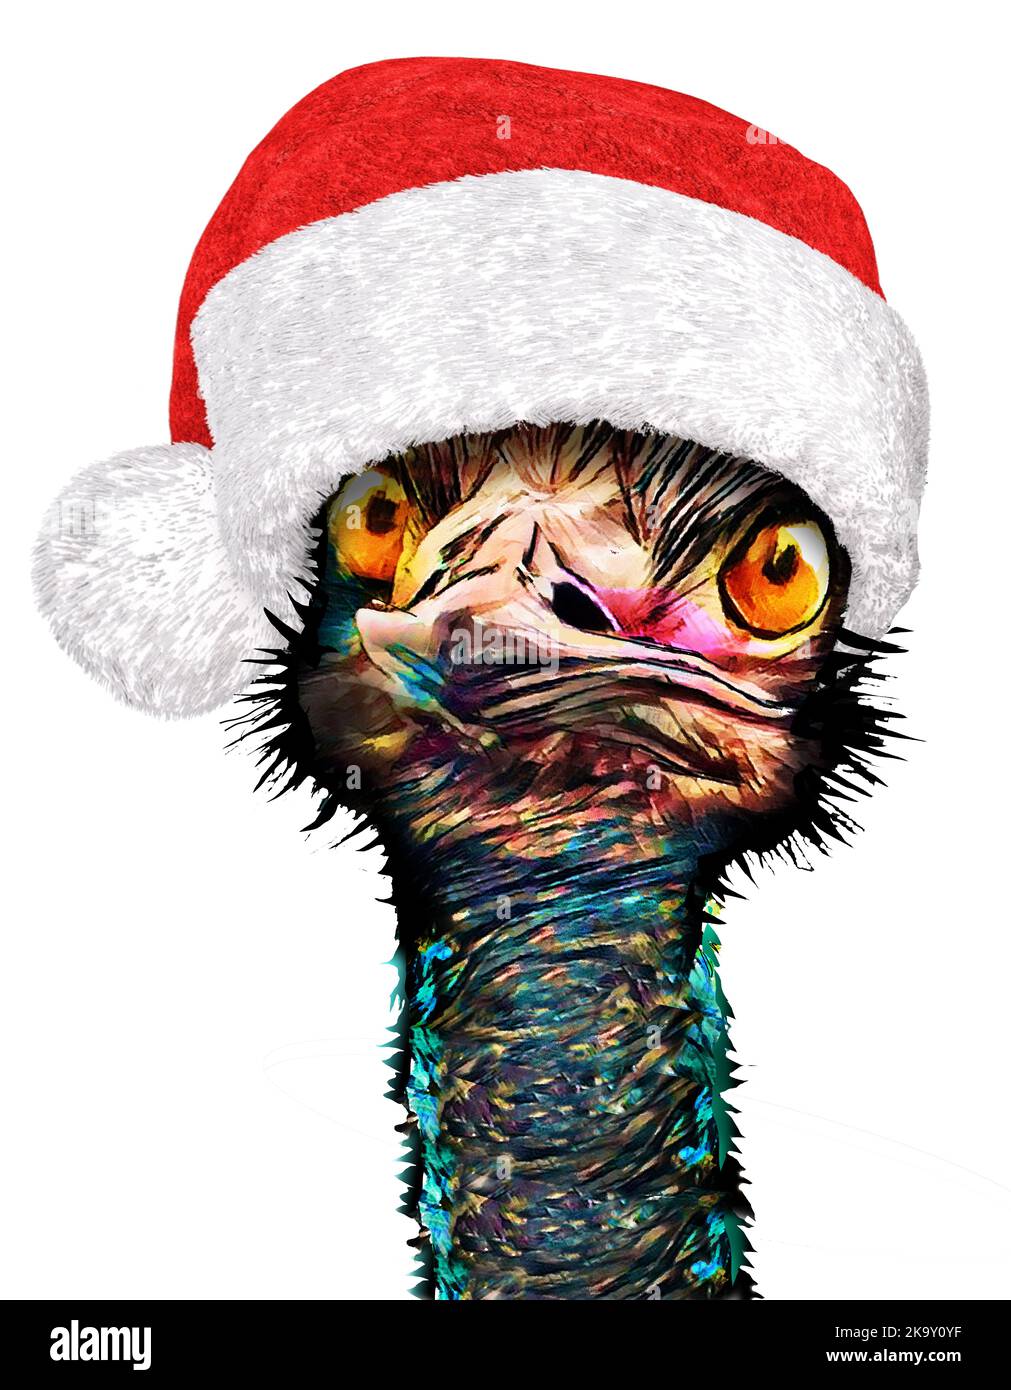 A funny looking emu bird wears a santa hat in this christmas themed 3-d illustration isolated on a white background Stock Photo